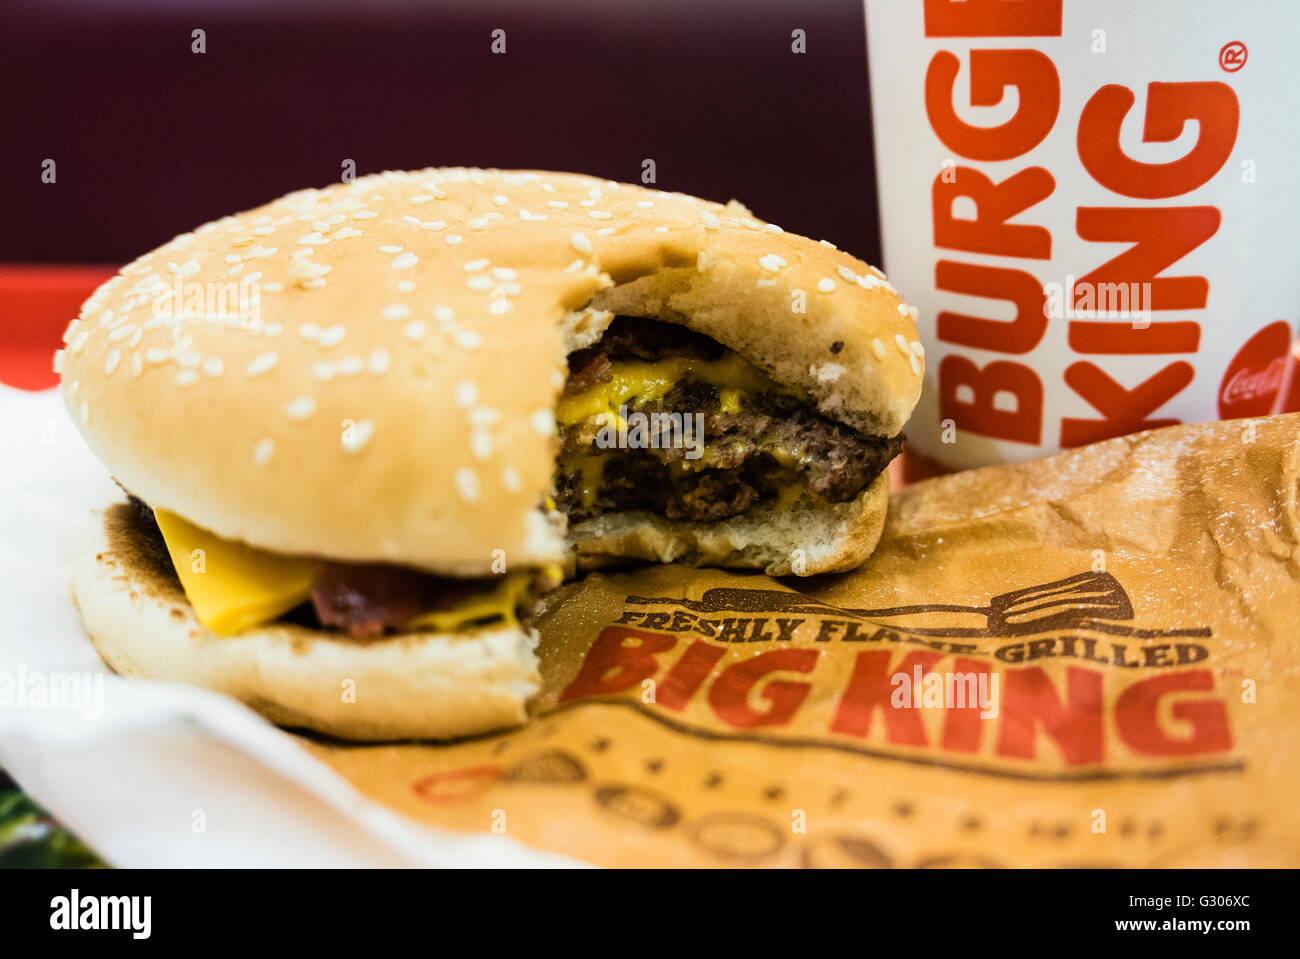 Hamburger, with a bite taken out of it, and drink on a tray in a Burger King fast-food restaurant Stock Photo